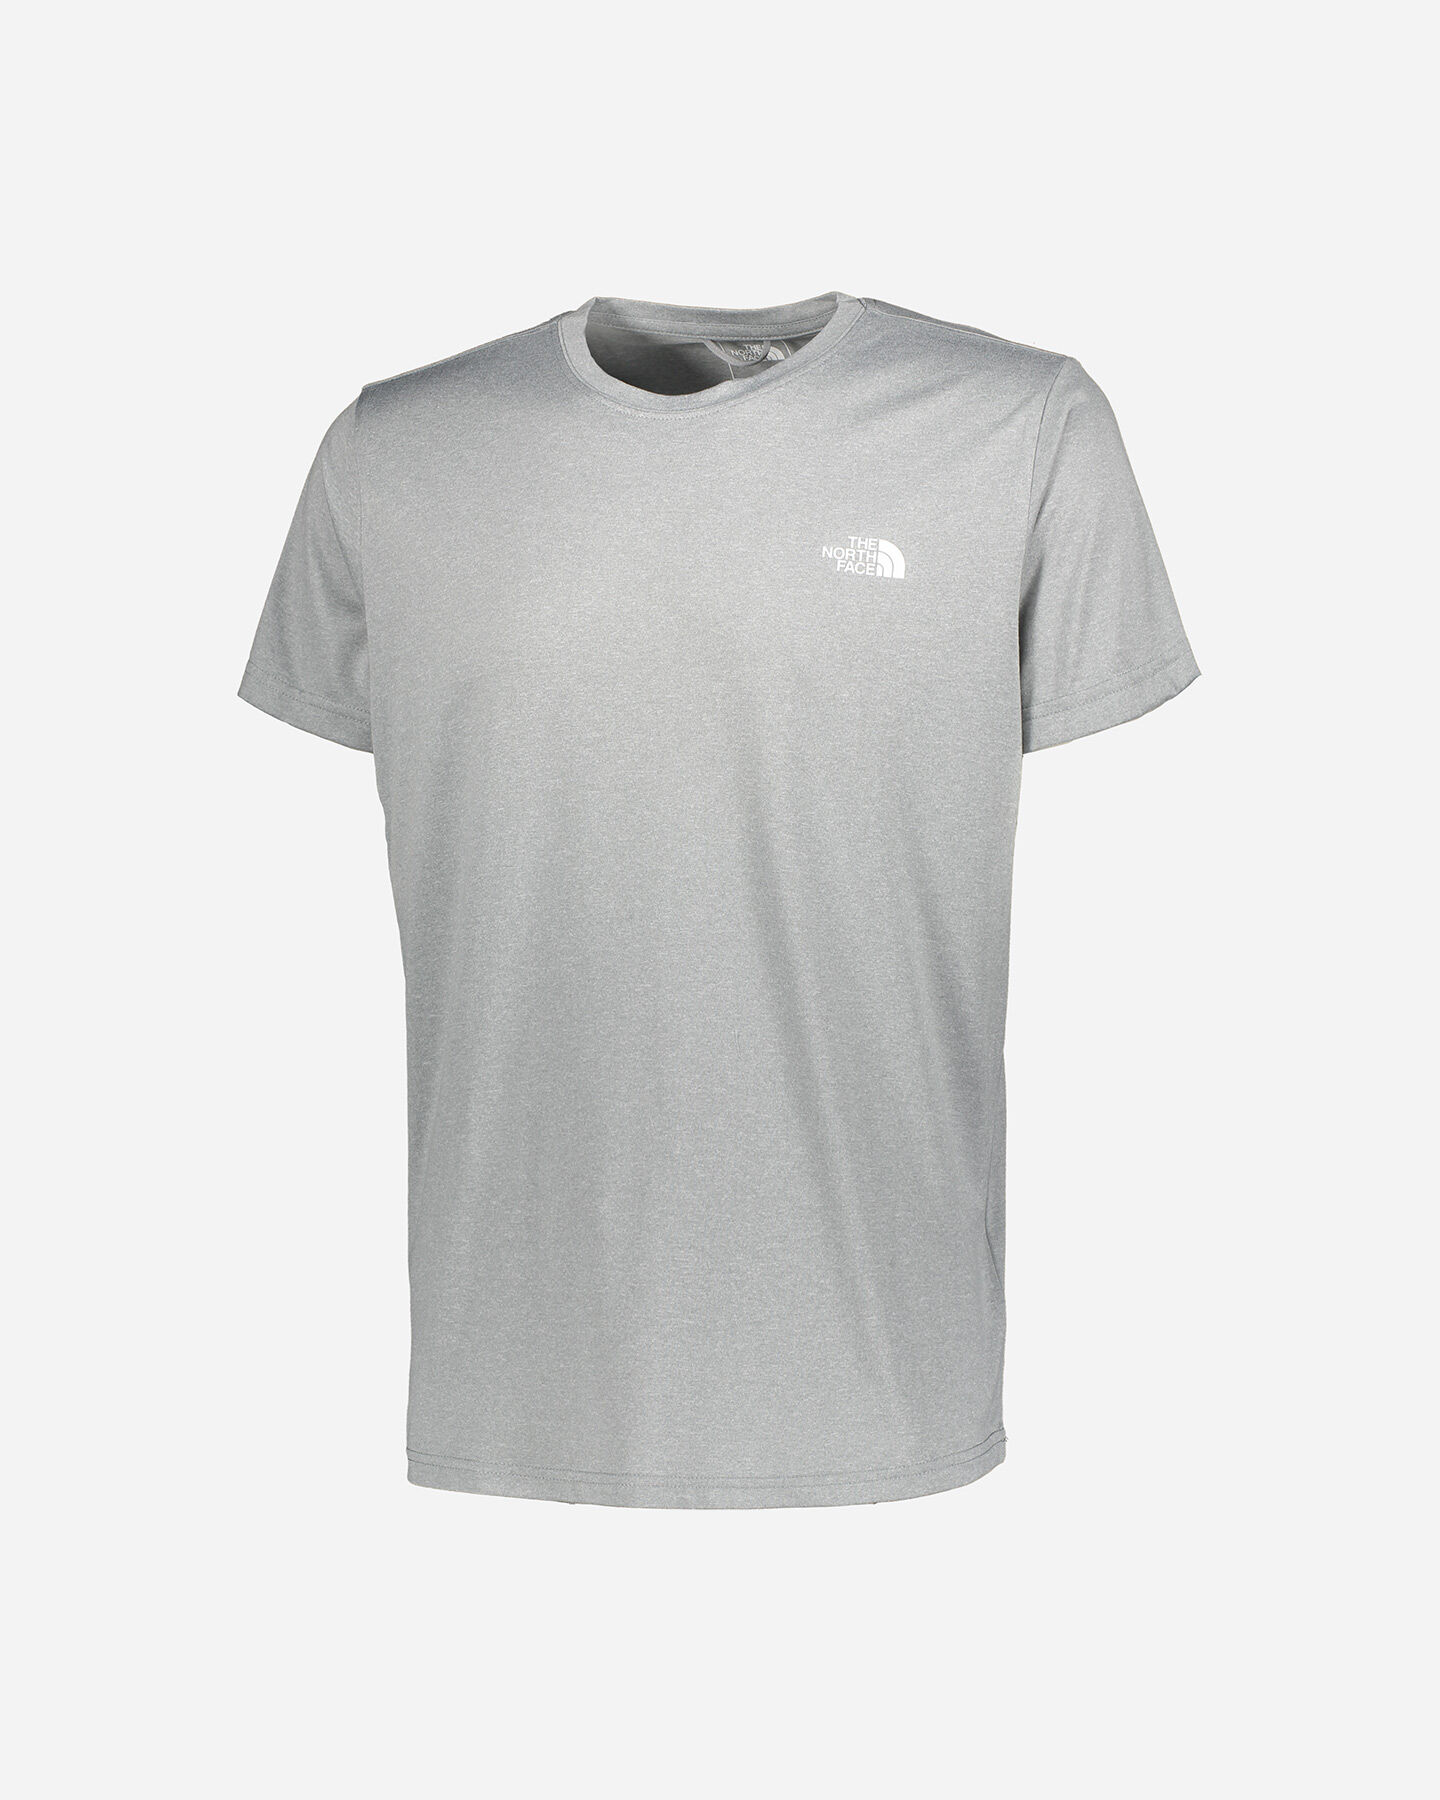  T-Shirt THE NORTH FACE REAXION AMP M S5292480|X8A|S scatto 0